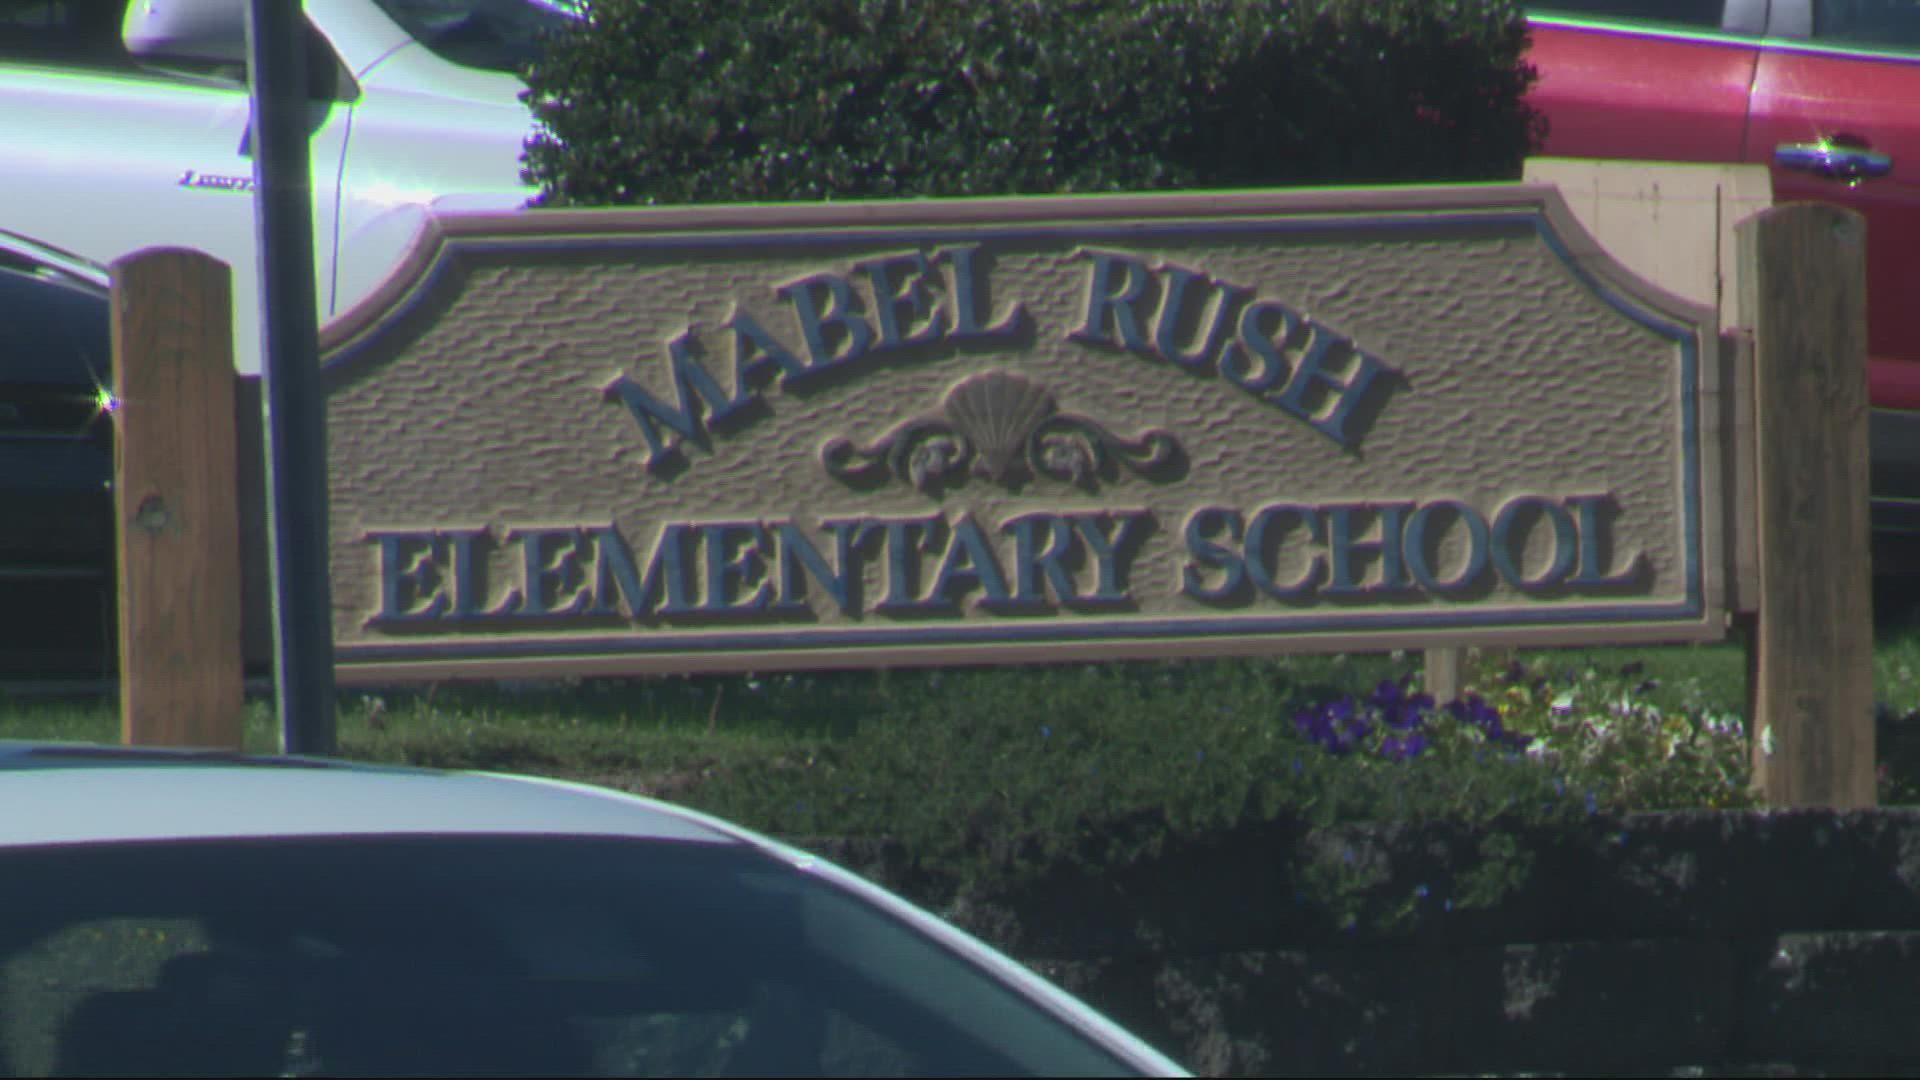 The staff member worked at Mabel Rush Elementary. This comes just a week after KGW reported Newberg students participated in an online 'slave trade.'